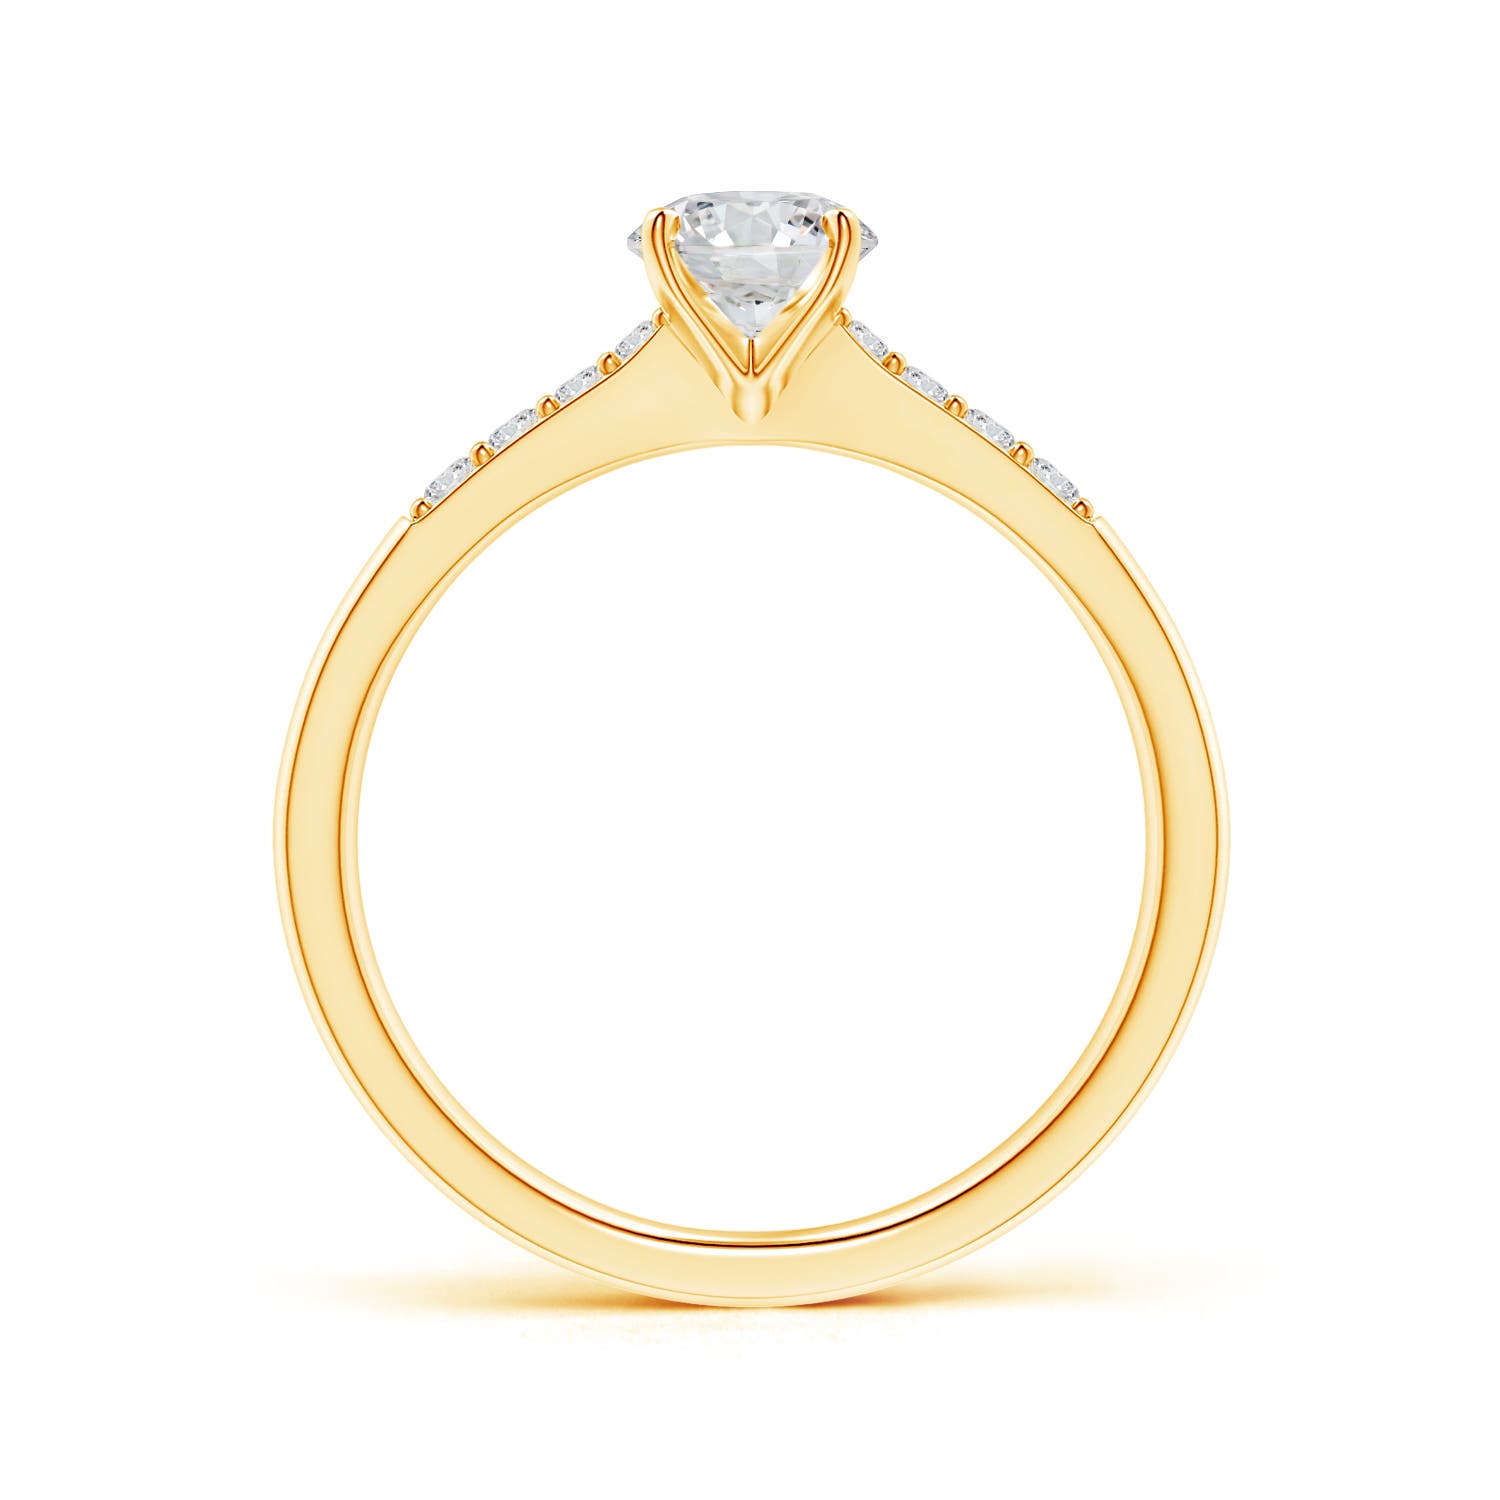 H, SI2 / 0.78 CT / 14 KT Yellow Gold